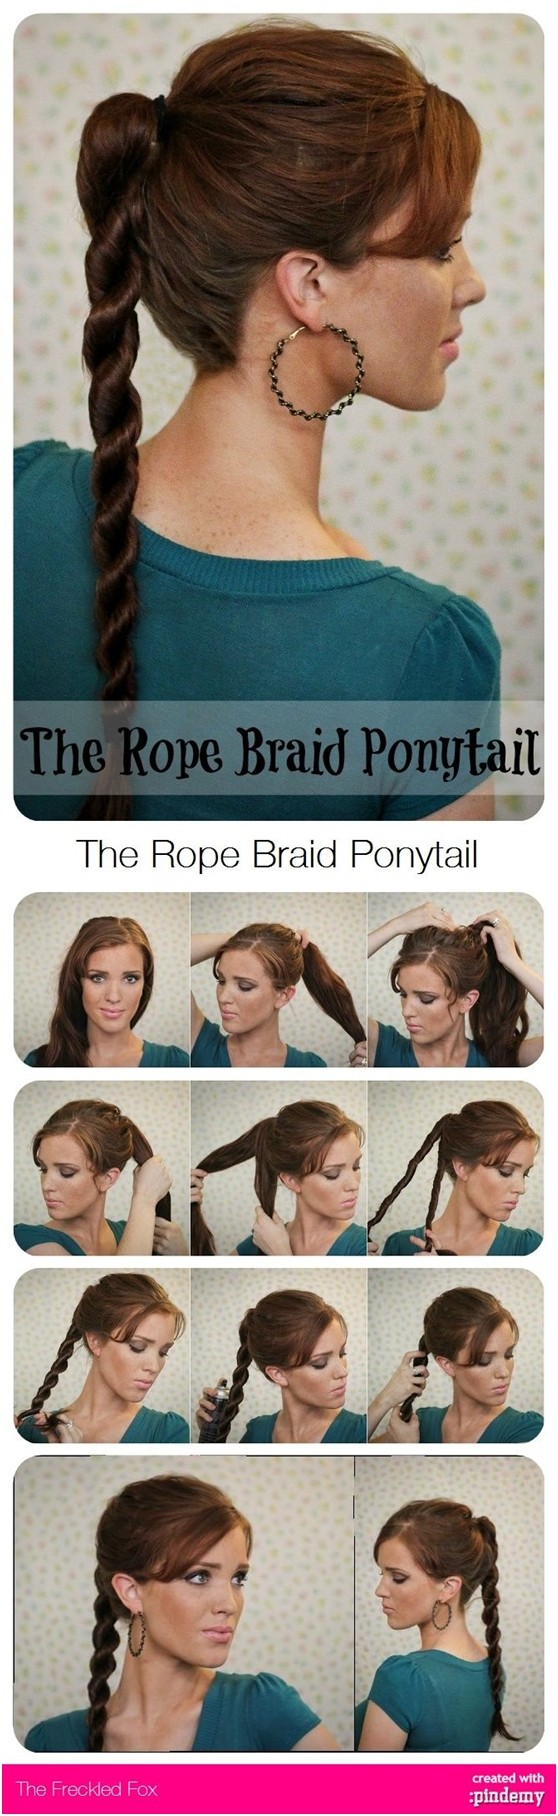 Easy Casual Hairstyles That You Can Do On Your Own While You Are In Quarantine